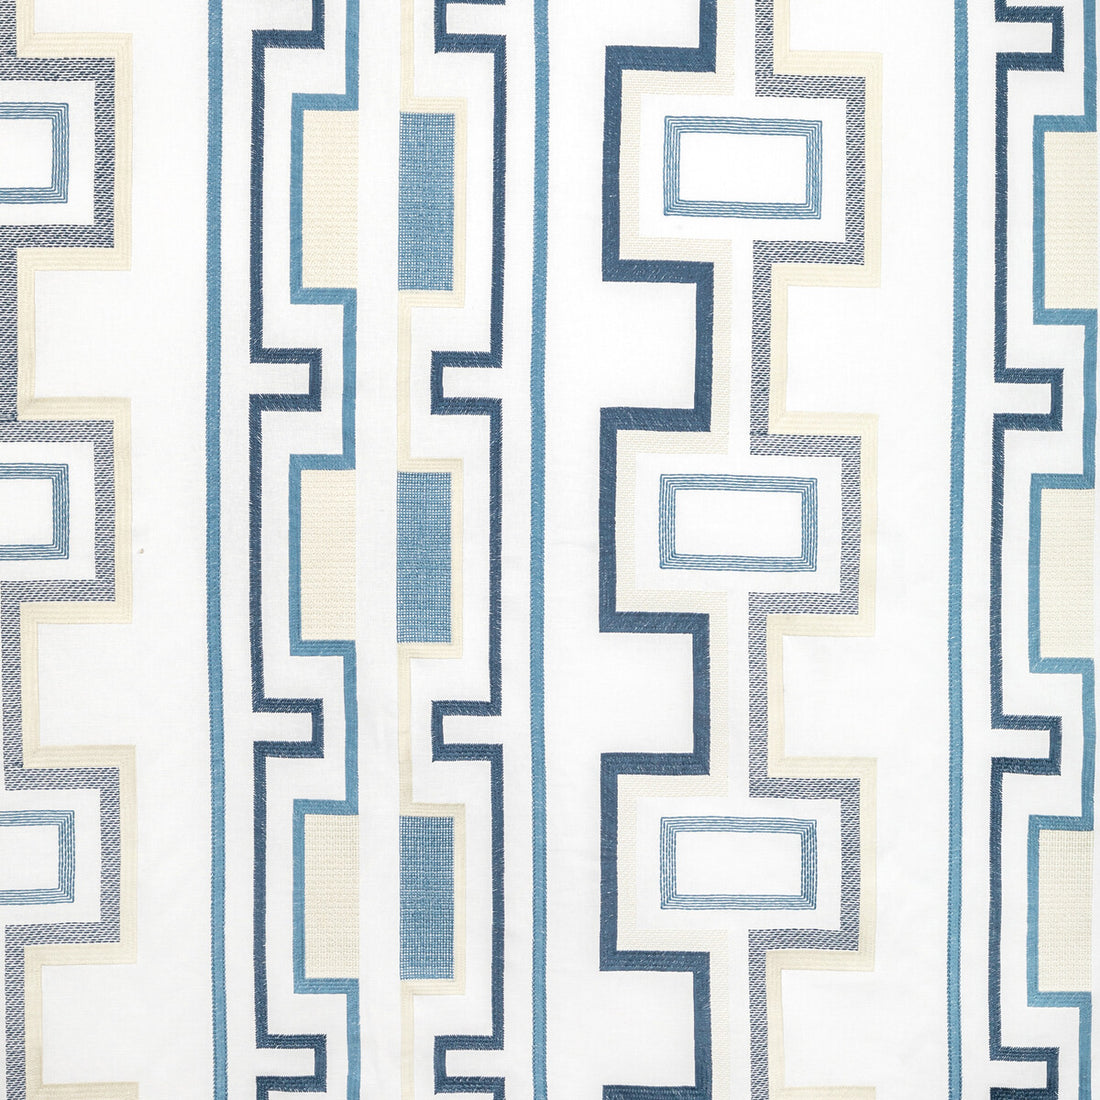 Tritone Embroidery fabric in navy color - pattern GWF-3779.50.0 - by Lee Jofa Modern in the Rhapsody collection